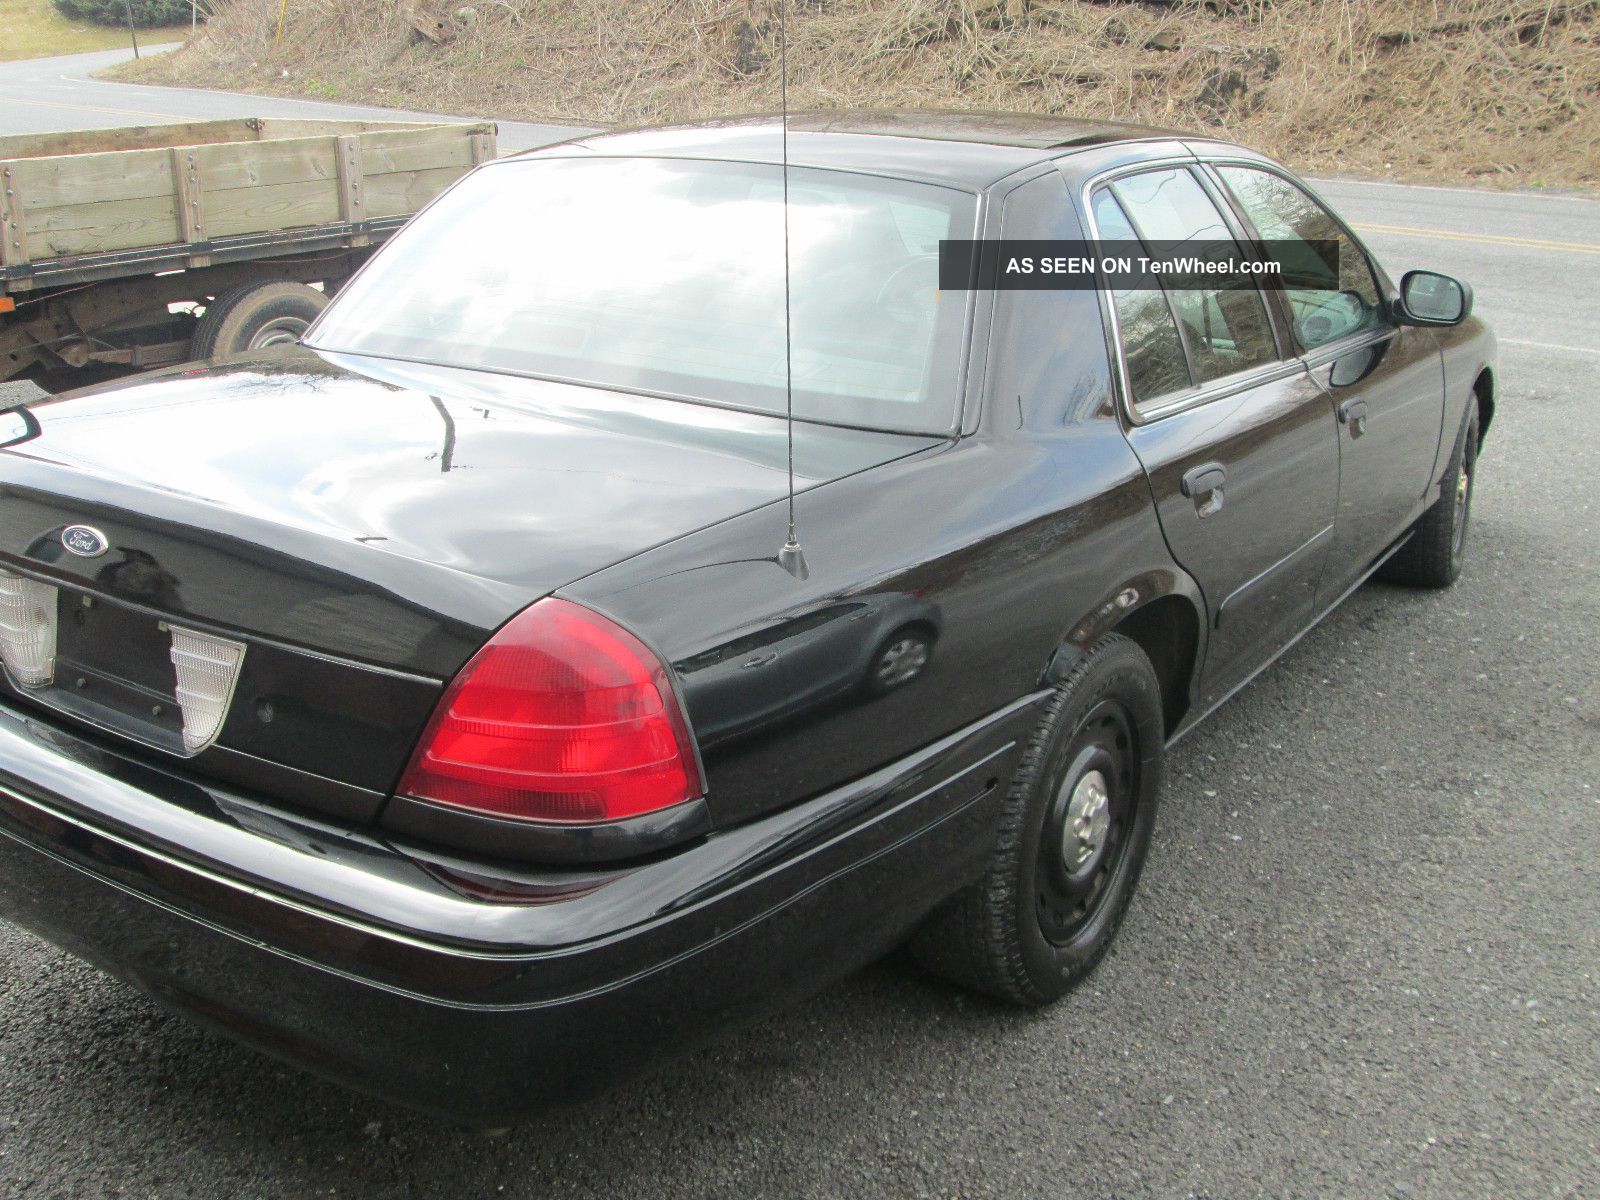 2005 Ford crown victoria police interceptor performance parts #9